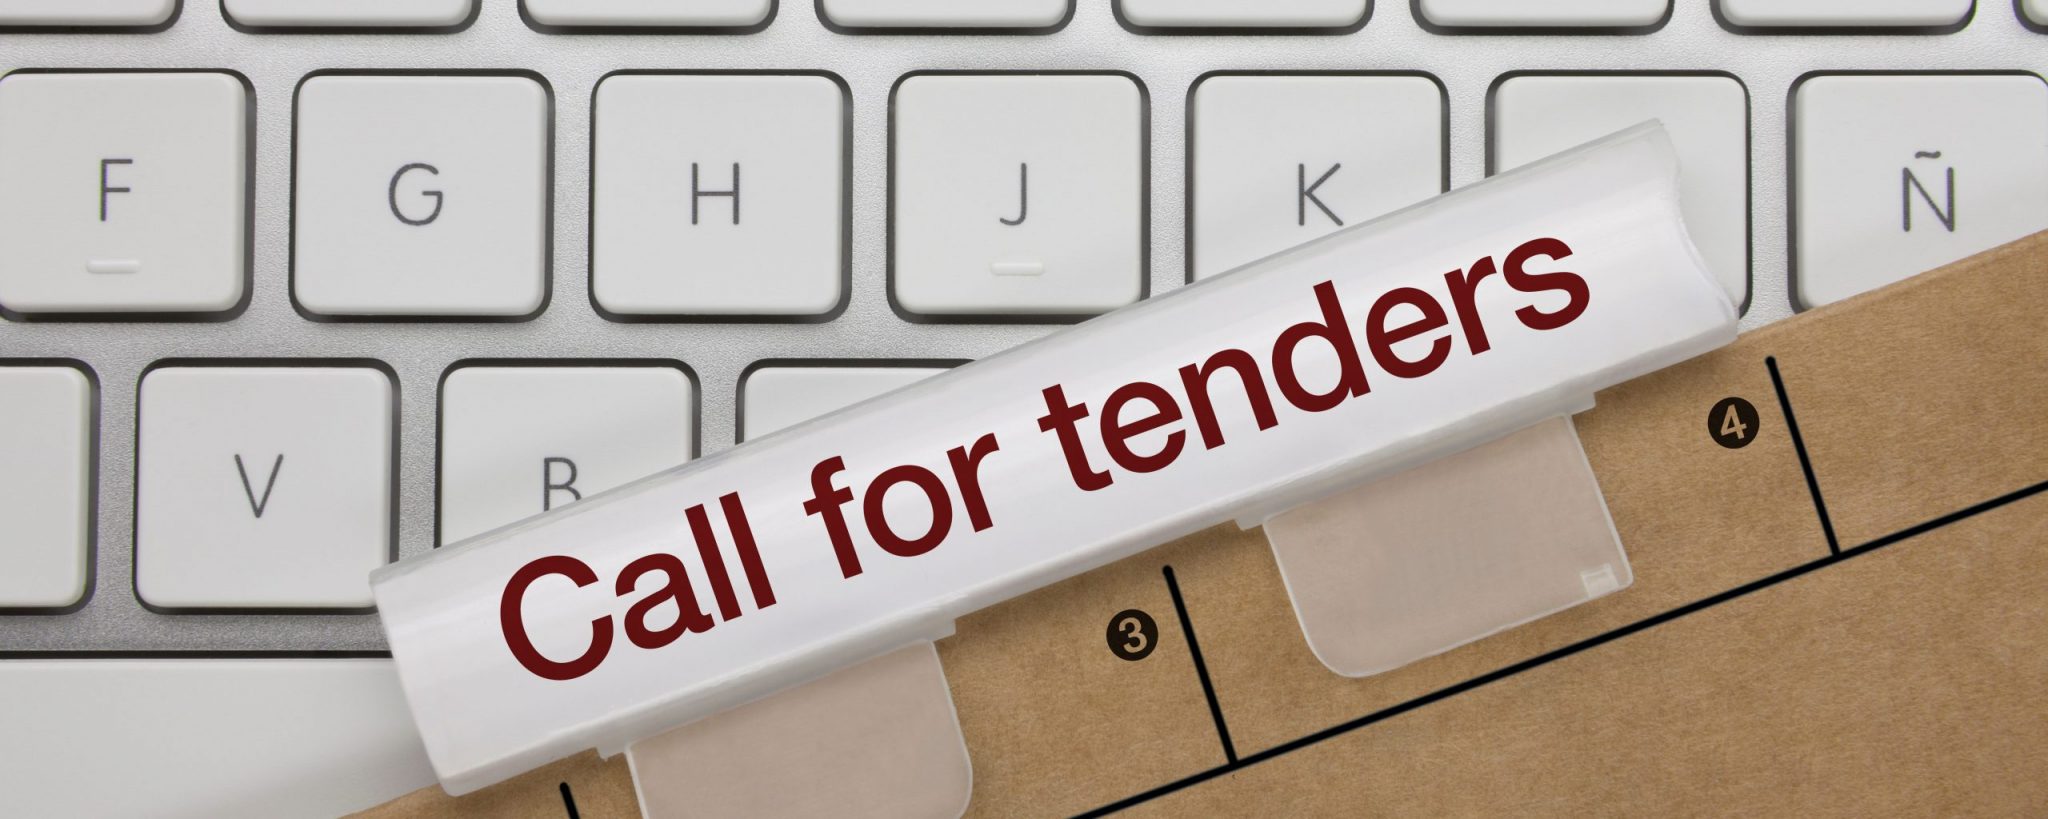 Call for tenders: provision a of a video animation on Strategic Lawsuits Against Public Participation (SLAPPs)